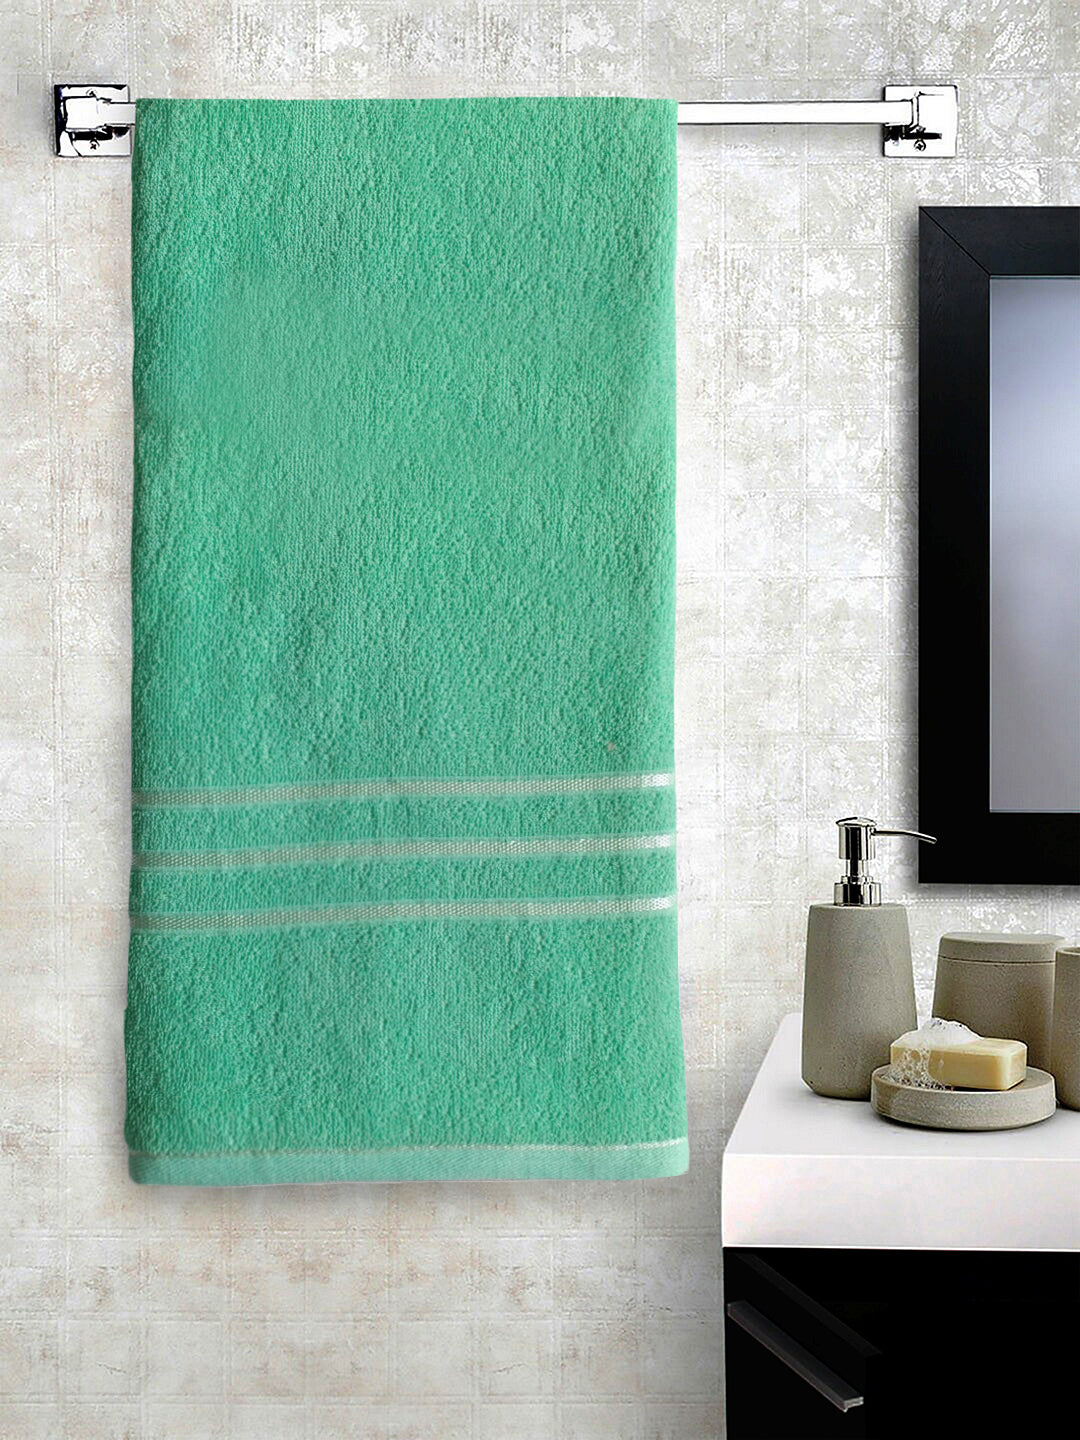 Green Large Terry Bath Towel Ultra Soft Super Absorbent for Men Women Kids Cotton with Solid crepe by Lushomes 400 GSM  (27x57 inches, 70x147 cms, Single Piece)